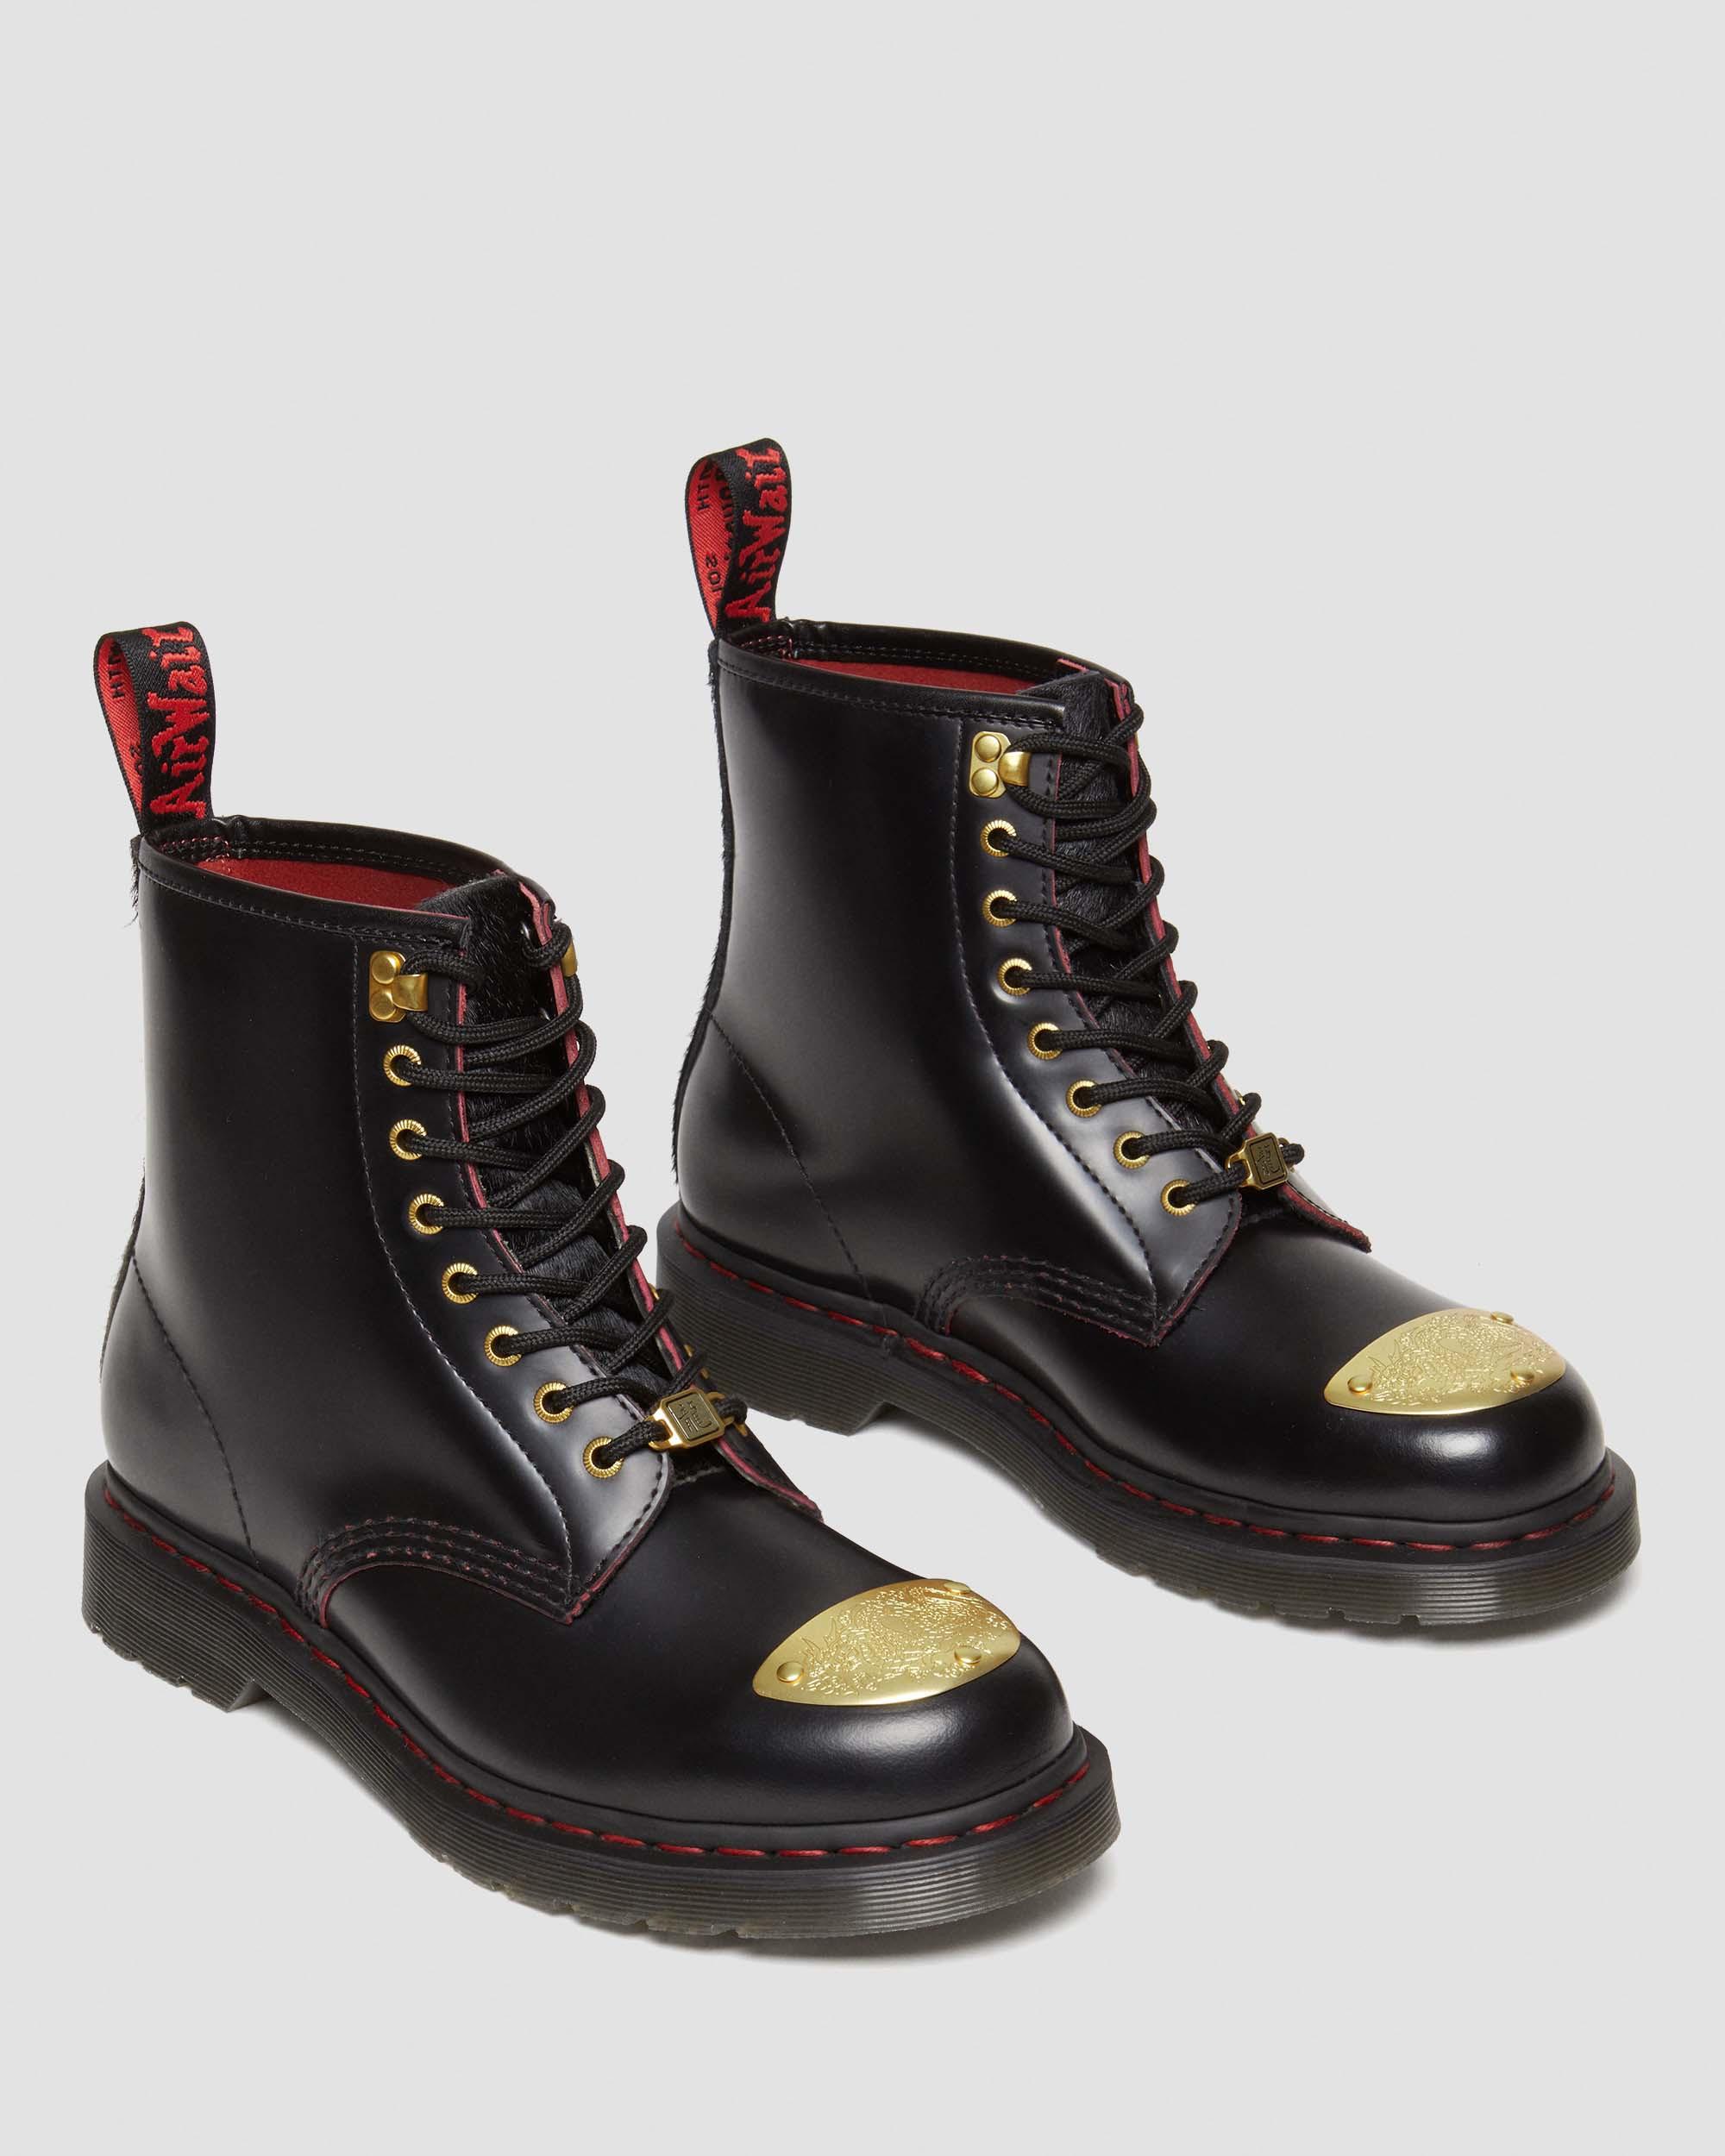 1460 Year of the Dragon Leather Lace Up Boots in Black+Red+Black